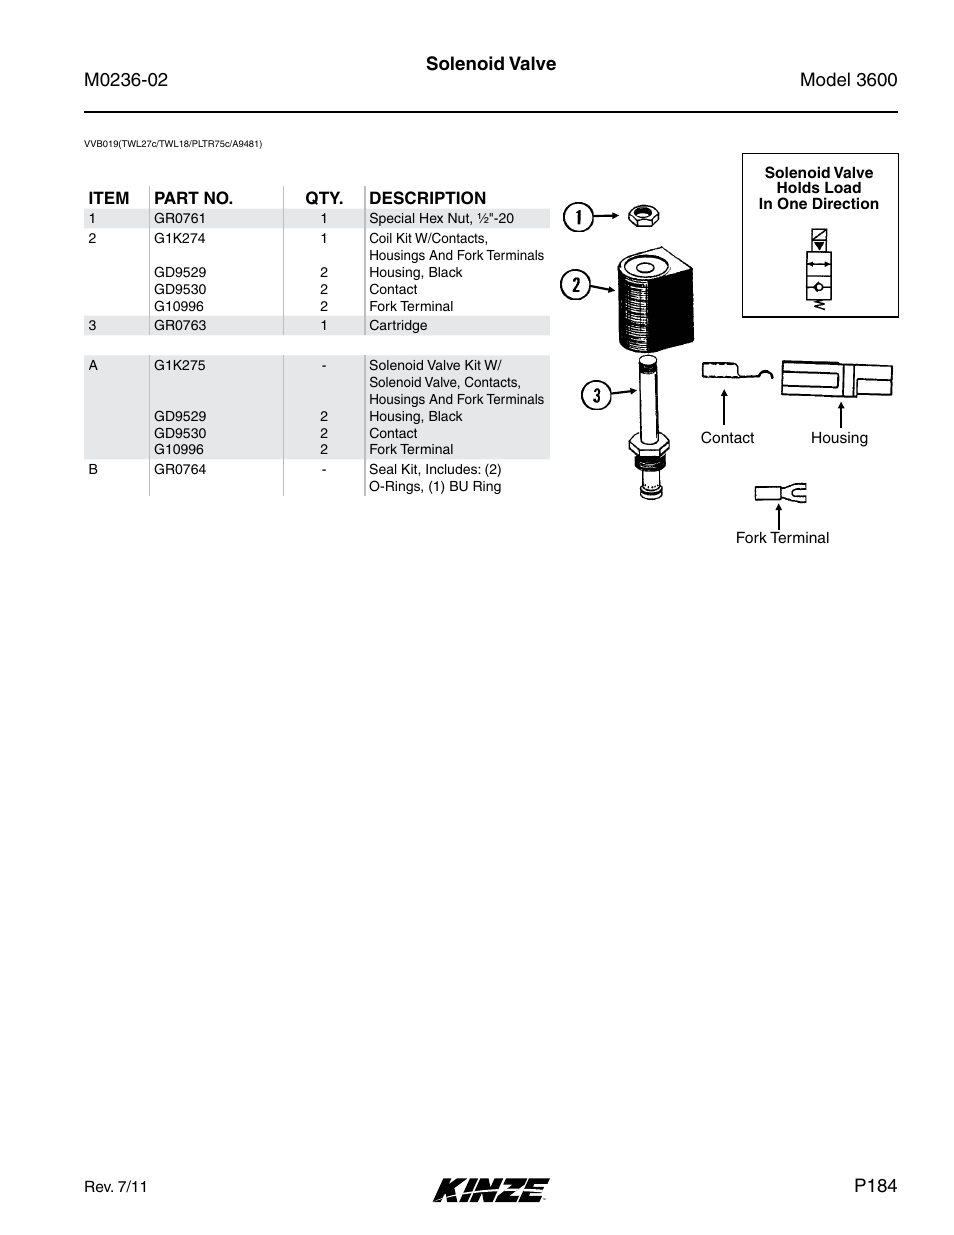 Solenoid valve, P184 | Kinze 3600 Lift and Rotate Planter Rev. 5/14 User Manual | Page 187 / 302